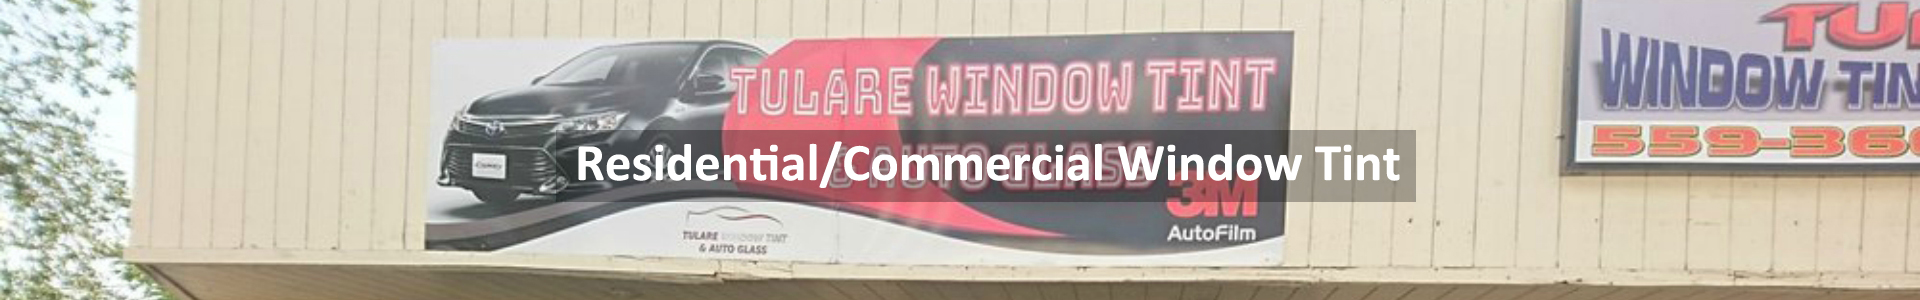 Residential/Commercial Window Tint Tulare and Kings County 